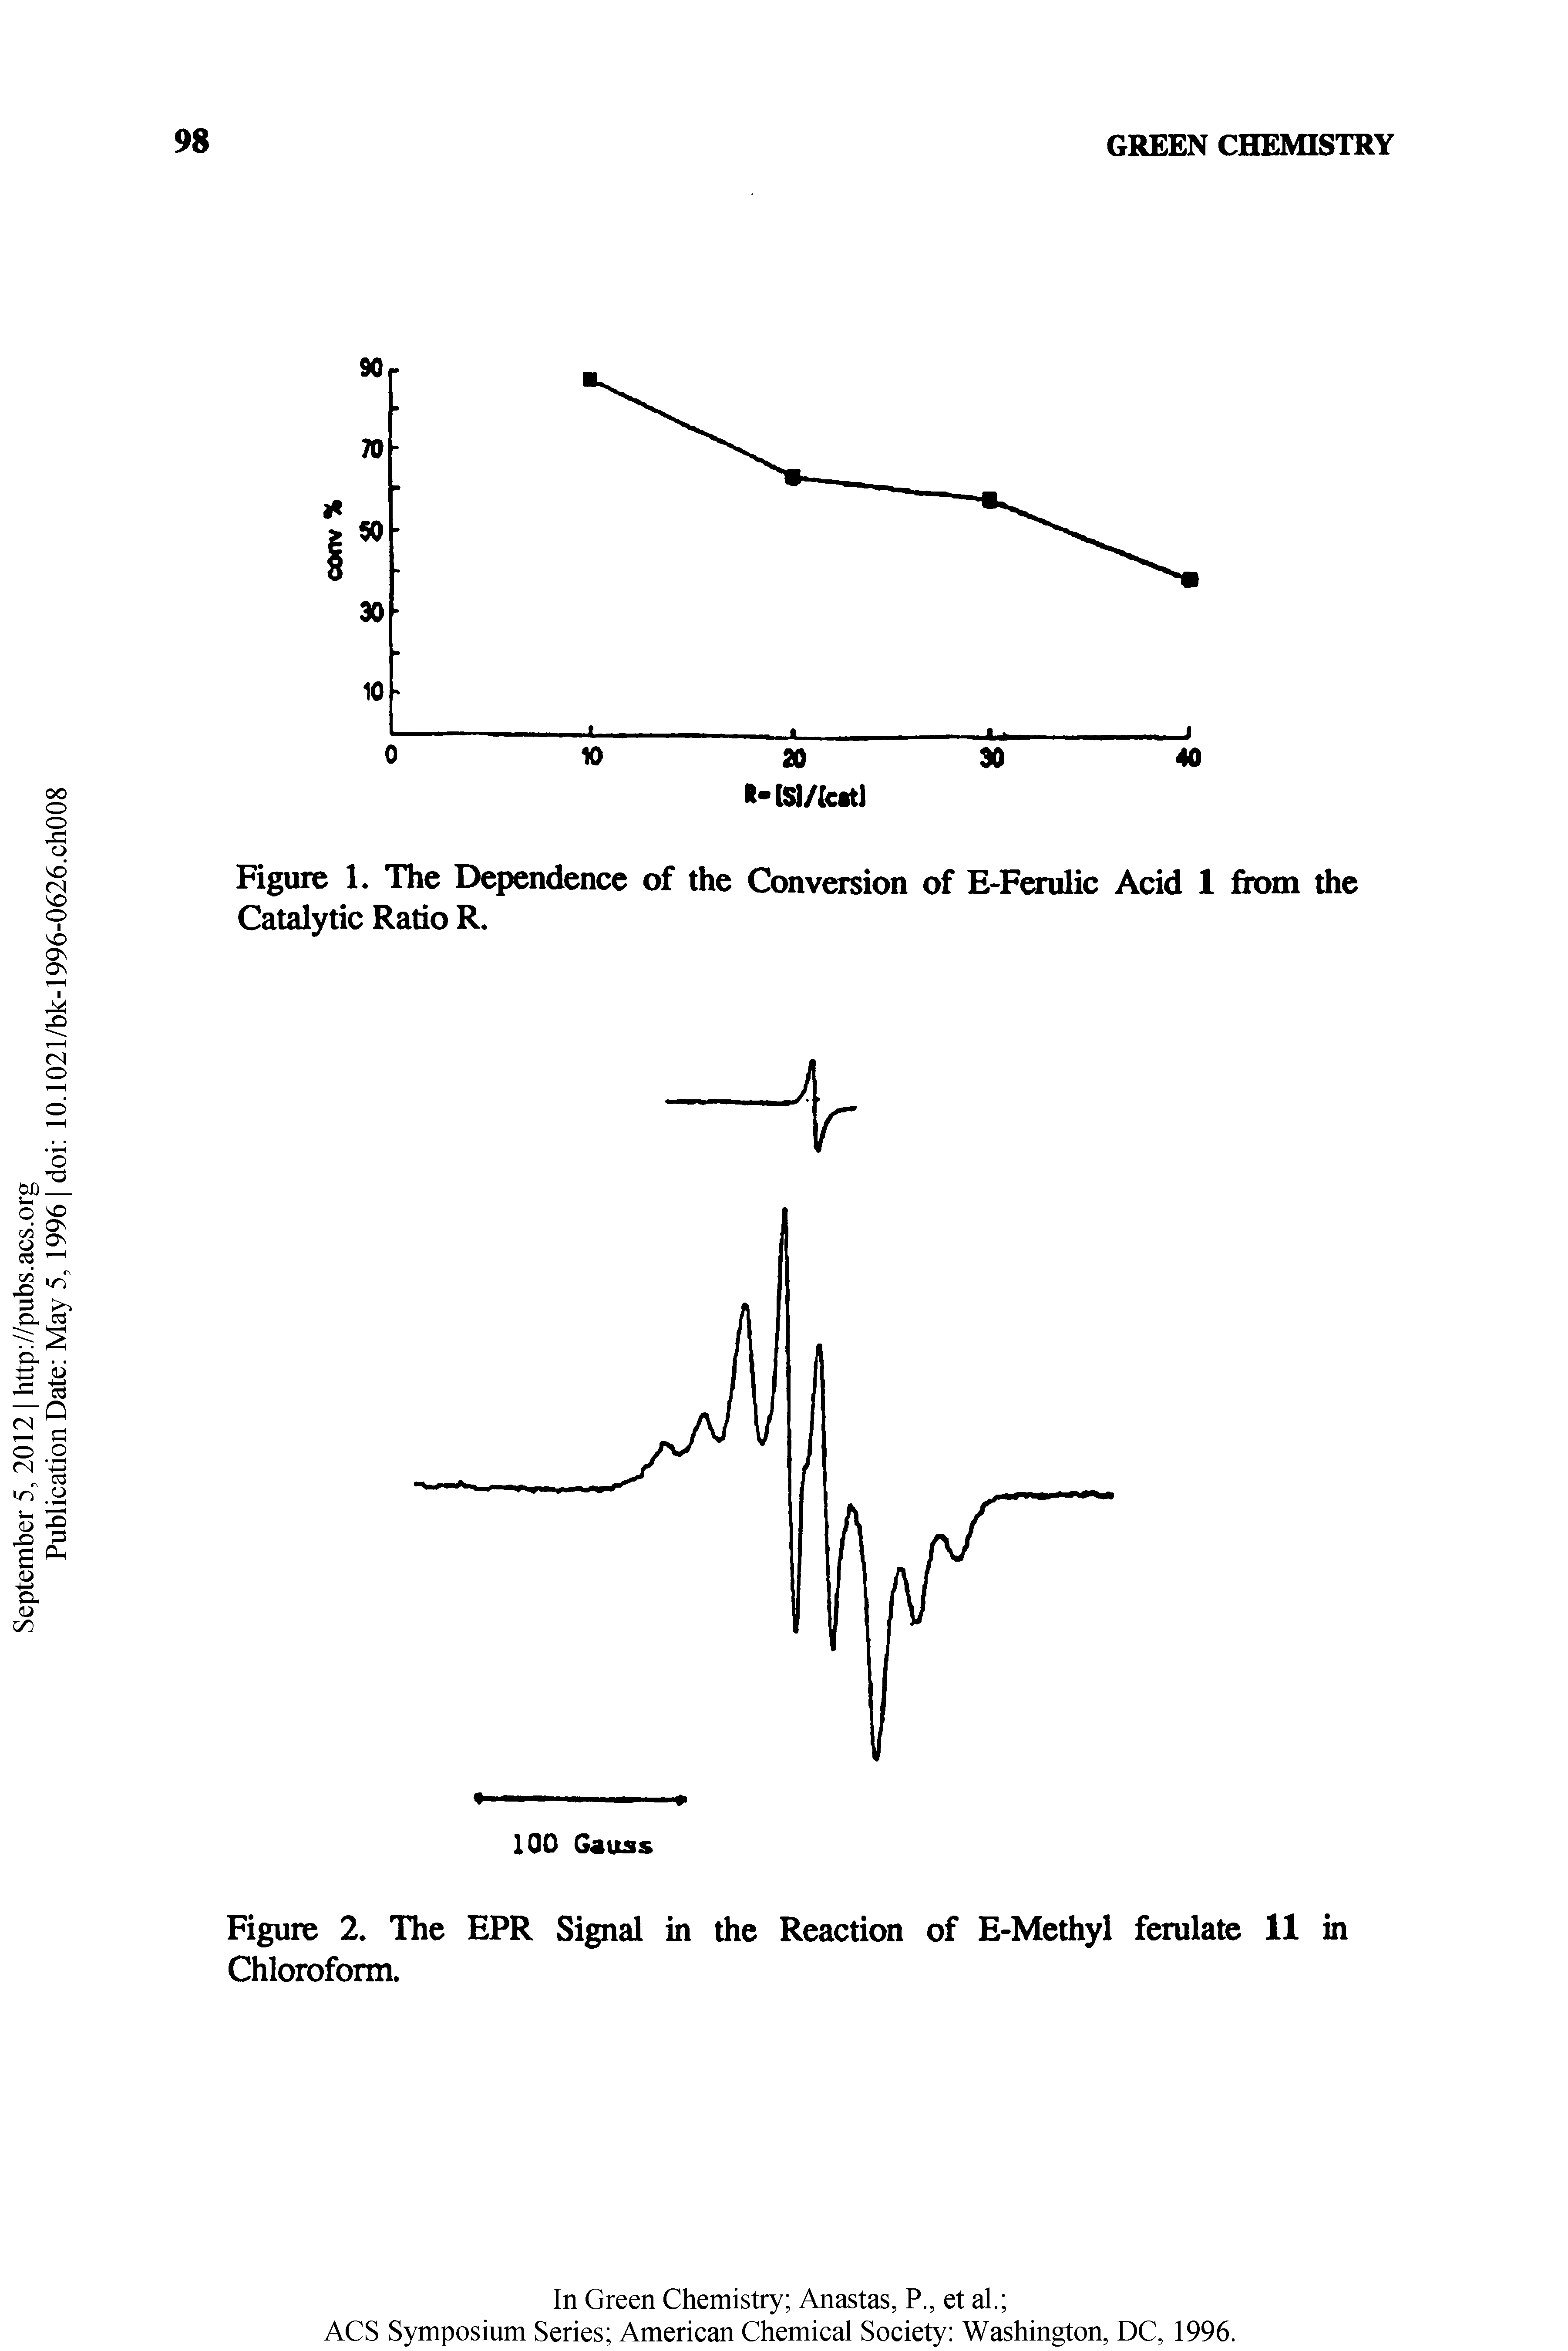 Figure 2. The EPR Signal in the Reaction of E-Methyl ferulate 11 in Chloroform.